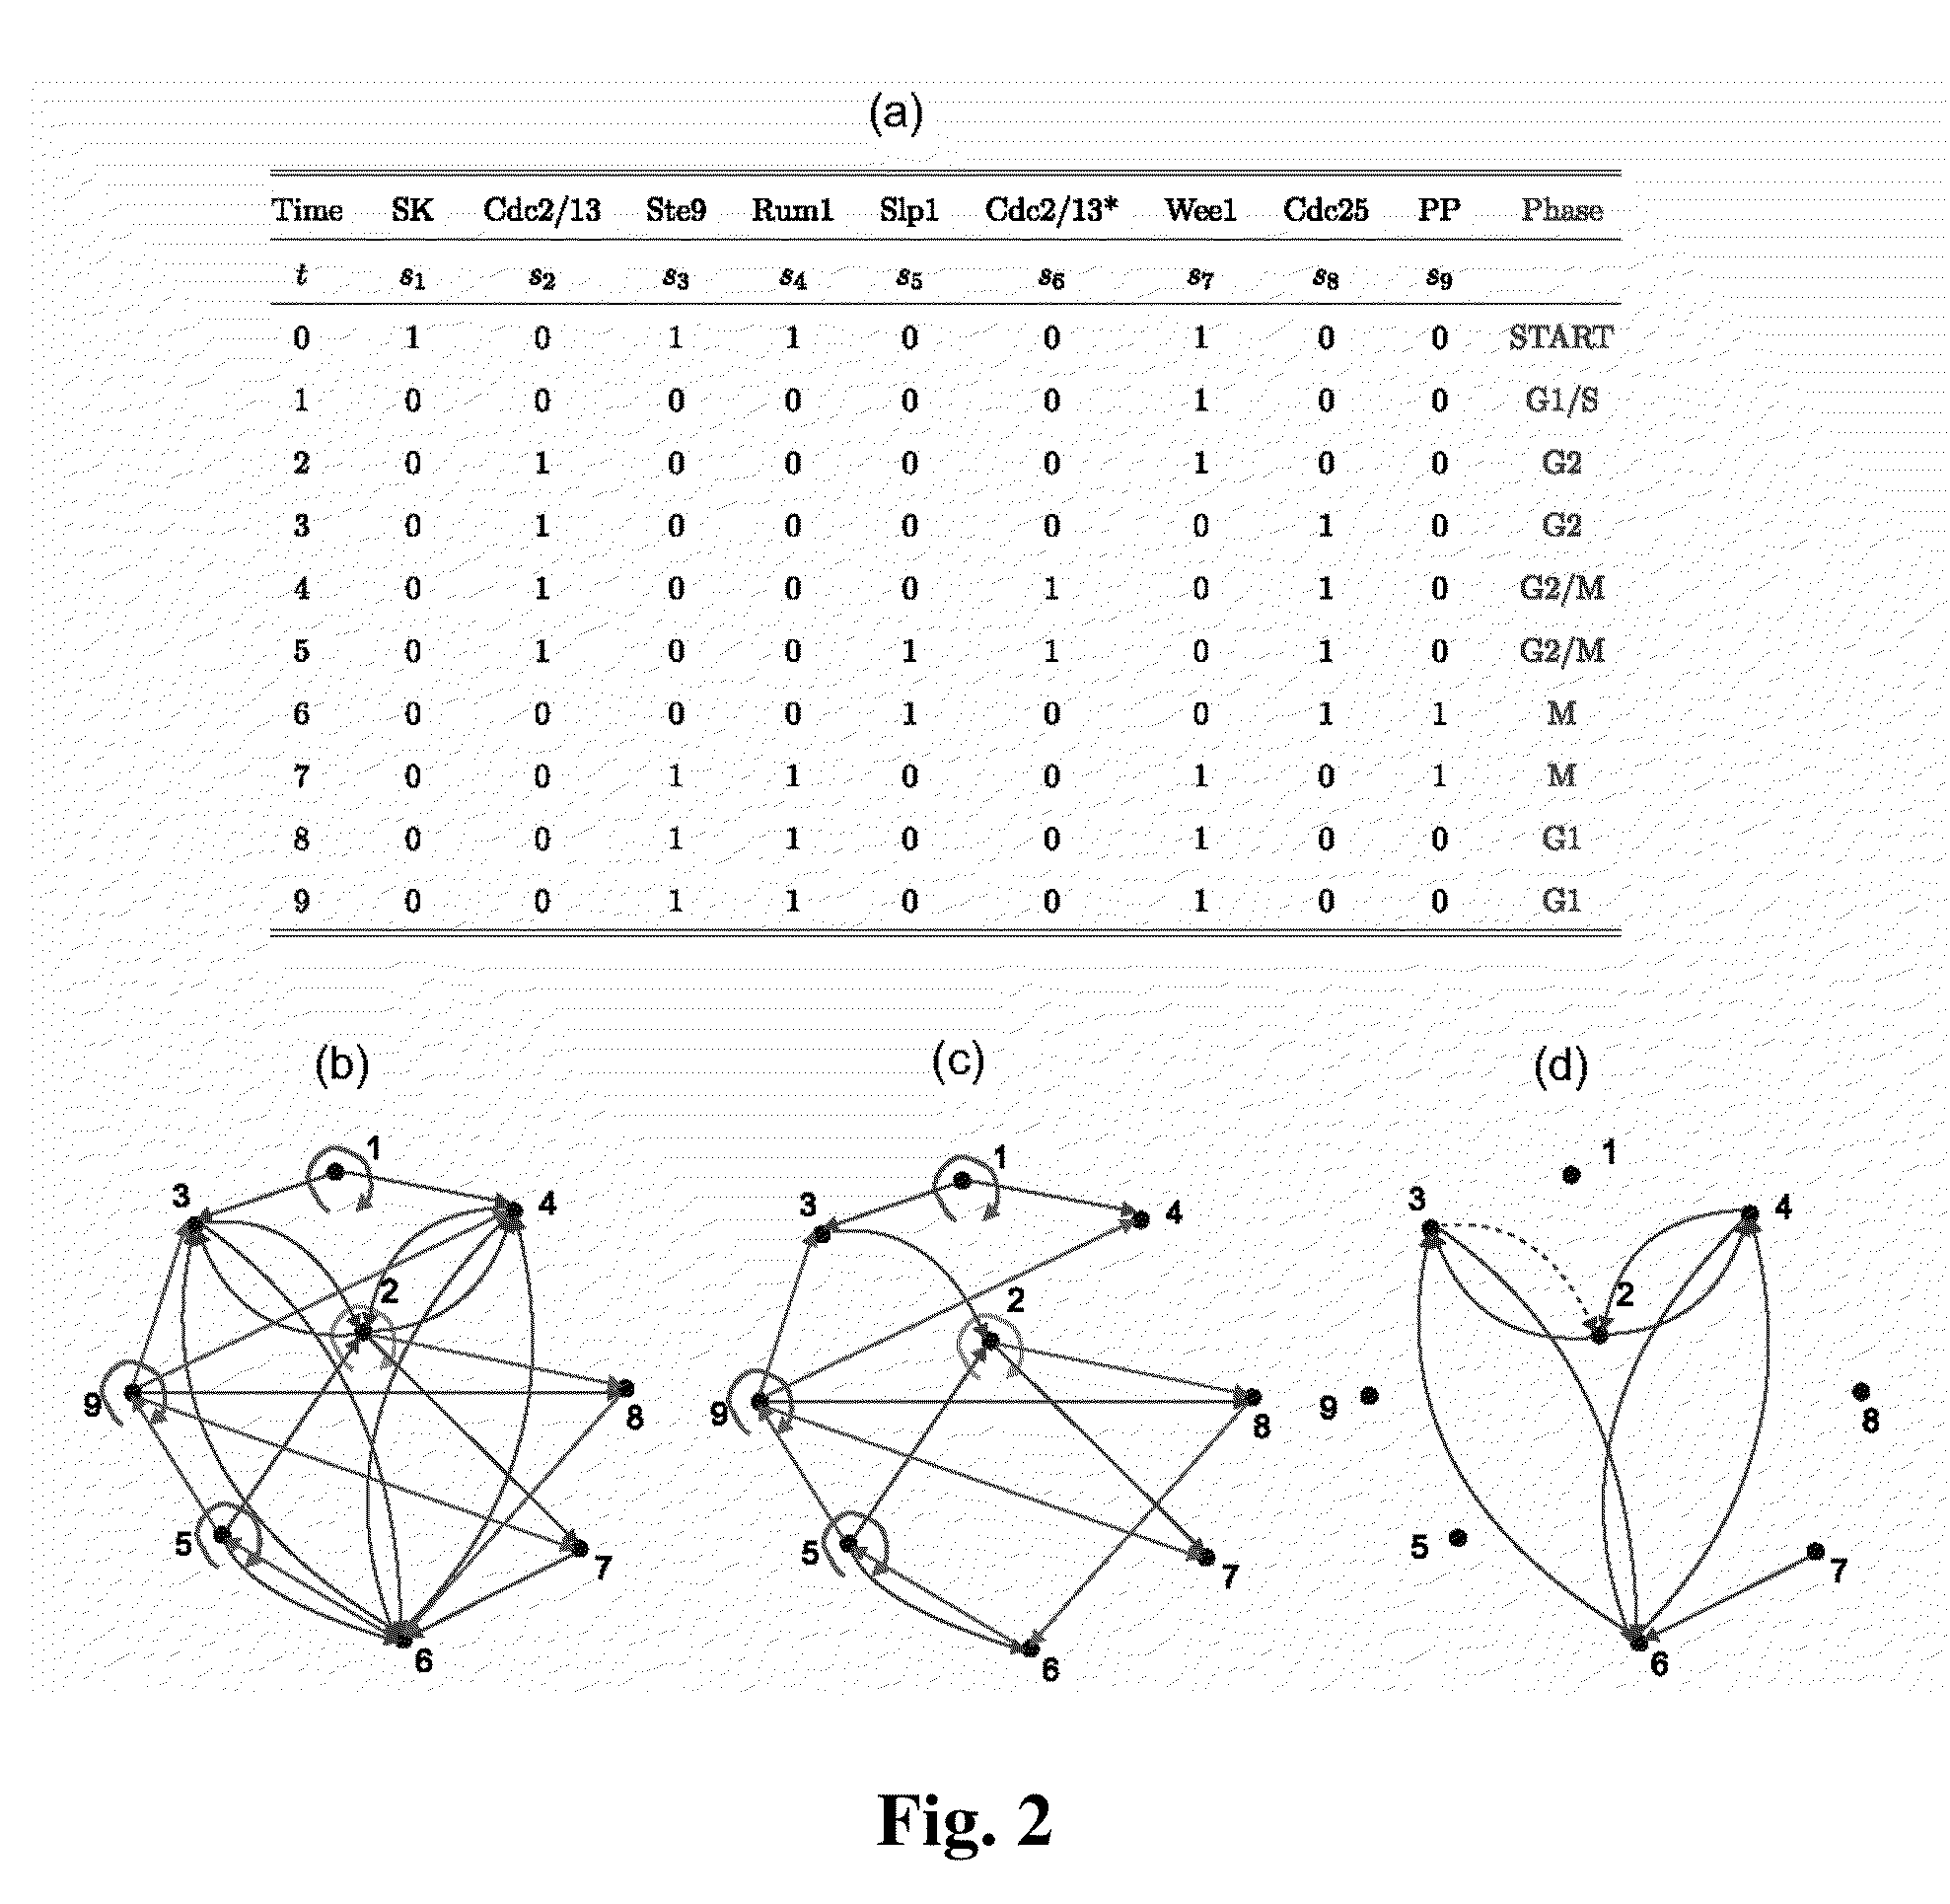 System and method for obtaining information about biological networks using a logic based approach